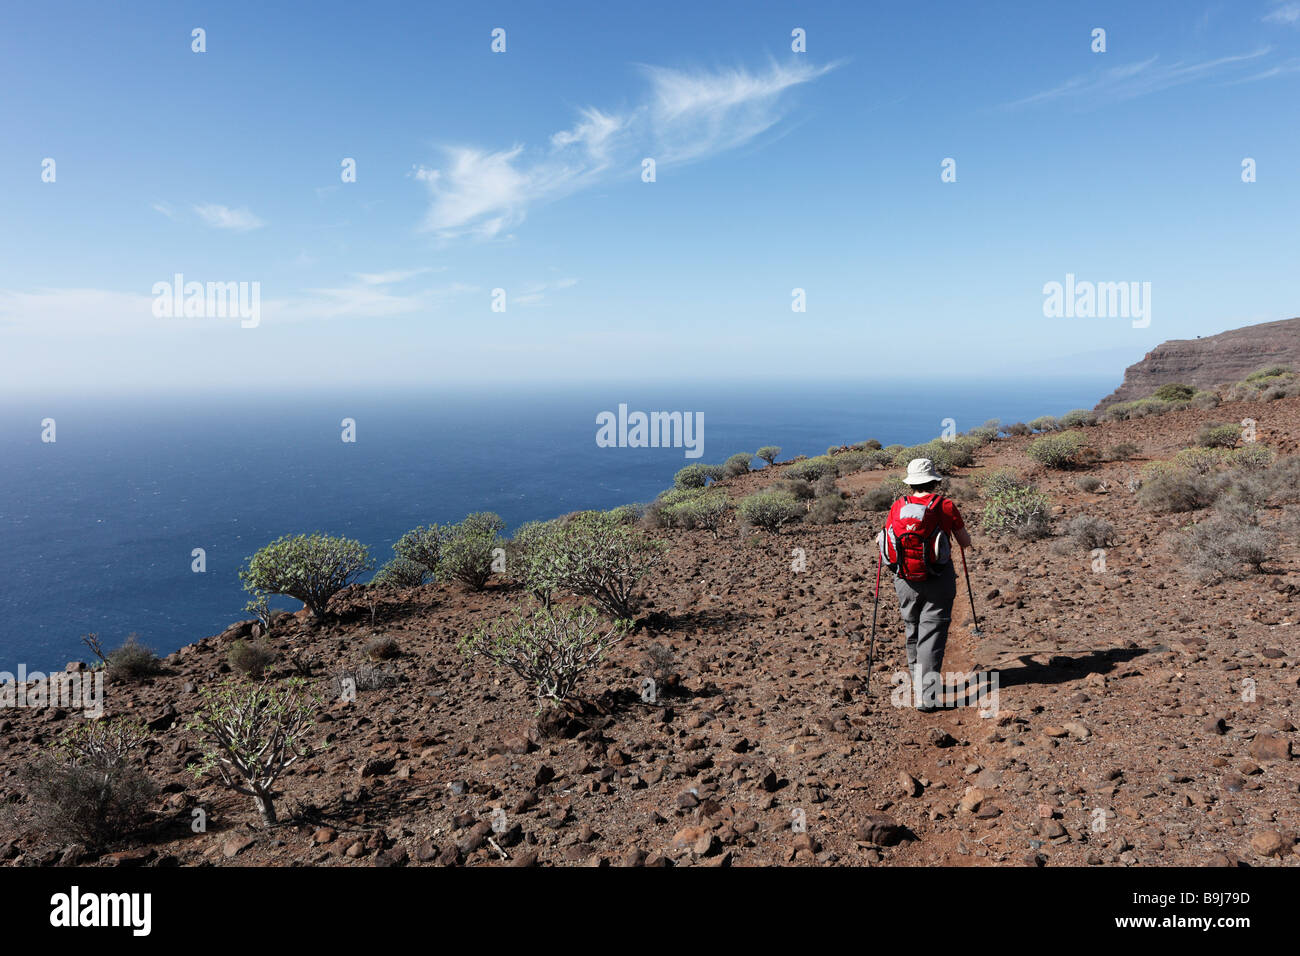 Woman with a rucksack and walking canes, Las Pilas, La Gomera, Canary Islands, Spain, Europe Stock Photo